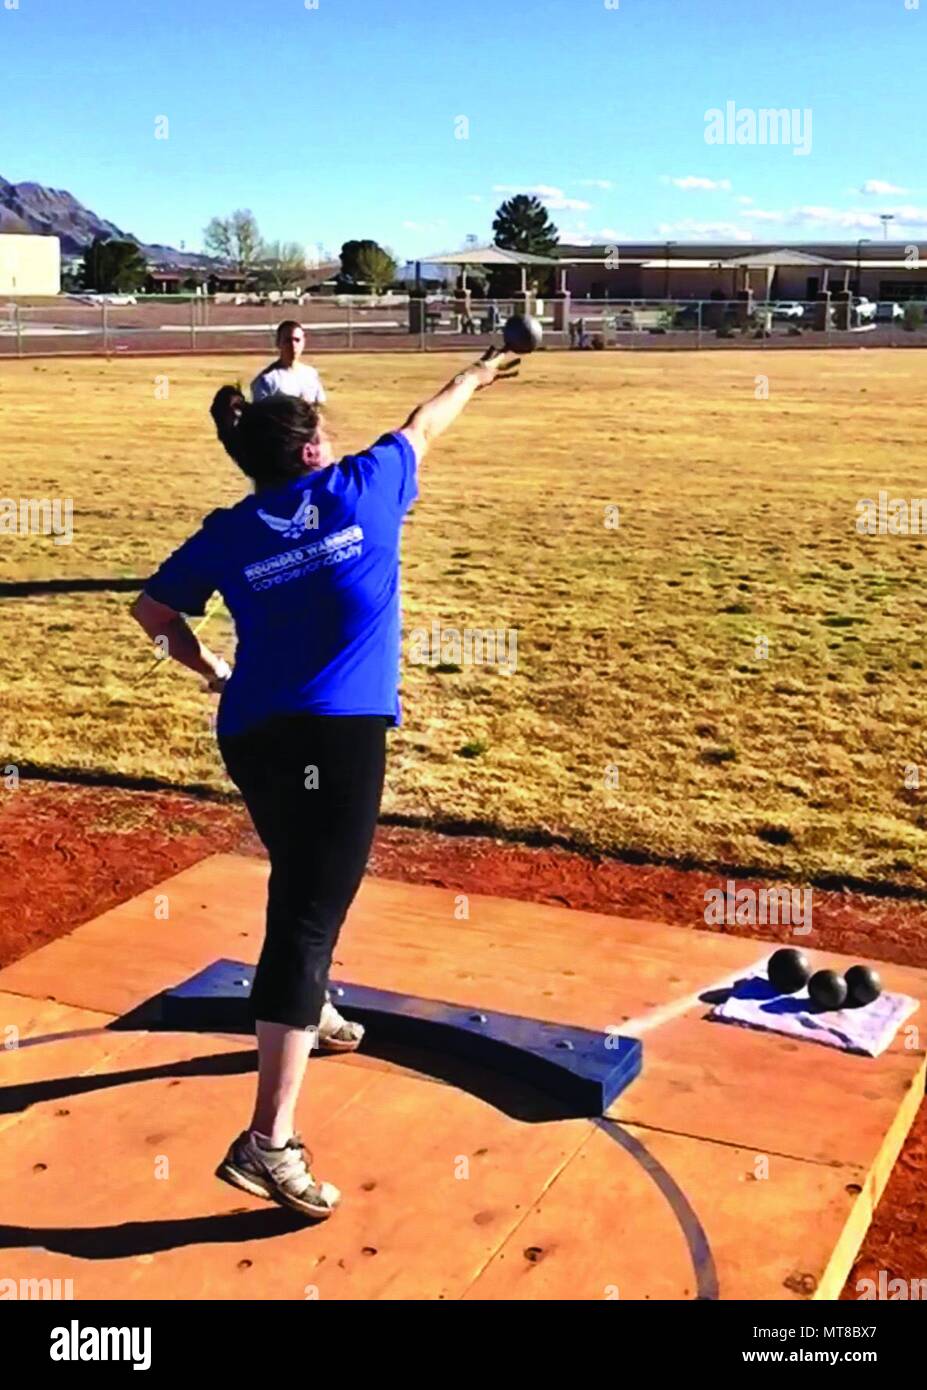 Lt Col Jackie Burns, 552d Air Control Group, 552d Air Control Wing, competes in the shot put event at the Wounded Warrior Trials held February 17, 2017 at Nellis Air Force Base, Nevada.  Burns earned three Silver Medals and one Bronze Medal and was selected to the primary Air Force team that will compete in the Warrior Games in Chicago June 30 - July 8, 2017.    (Air Force photo by Marty Burns) Stock Photo